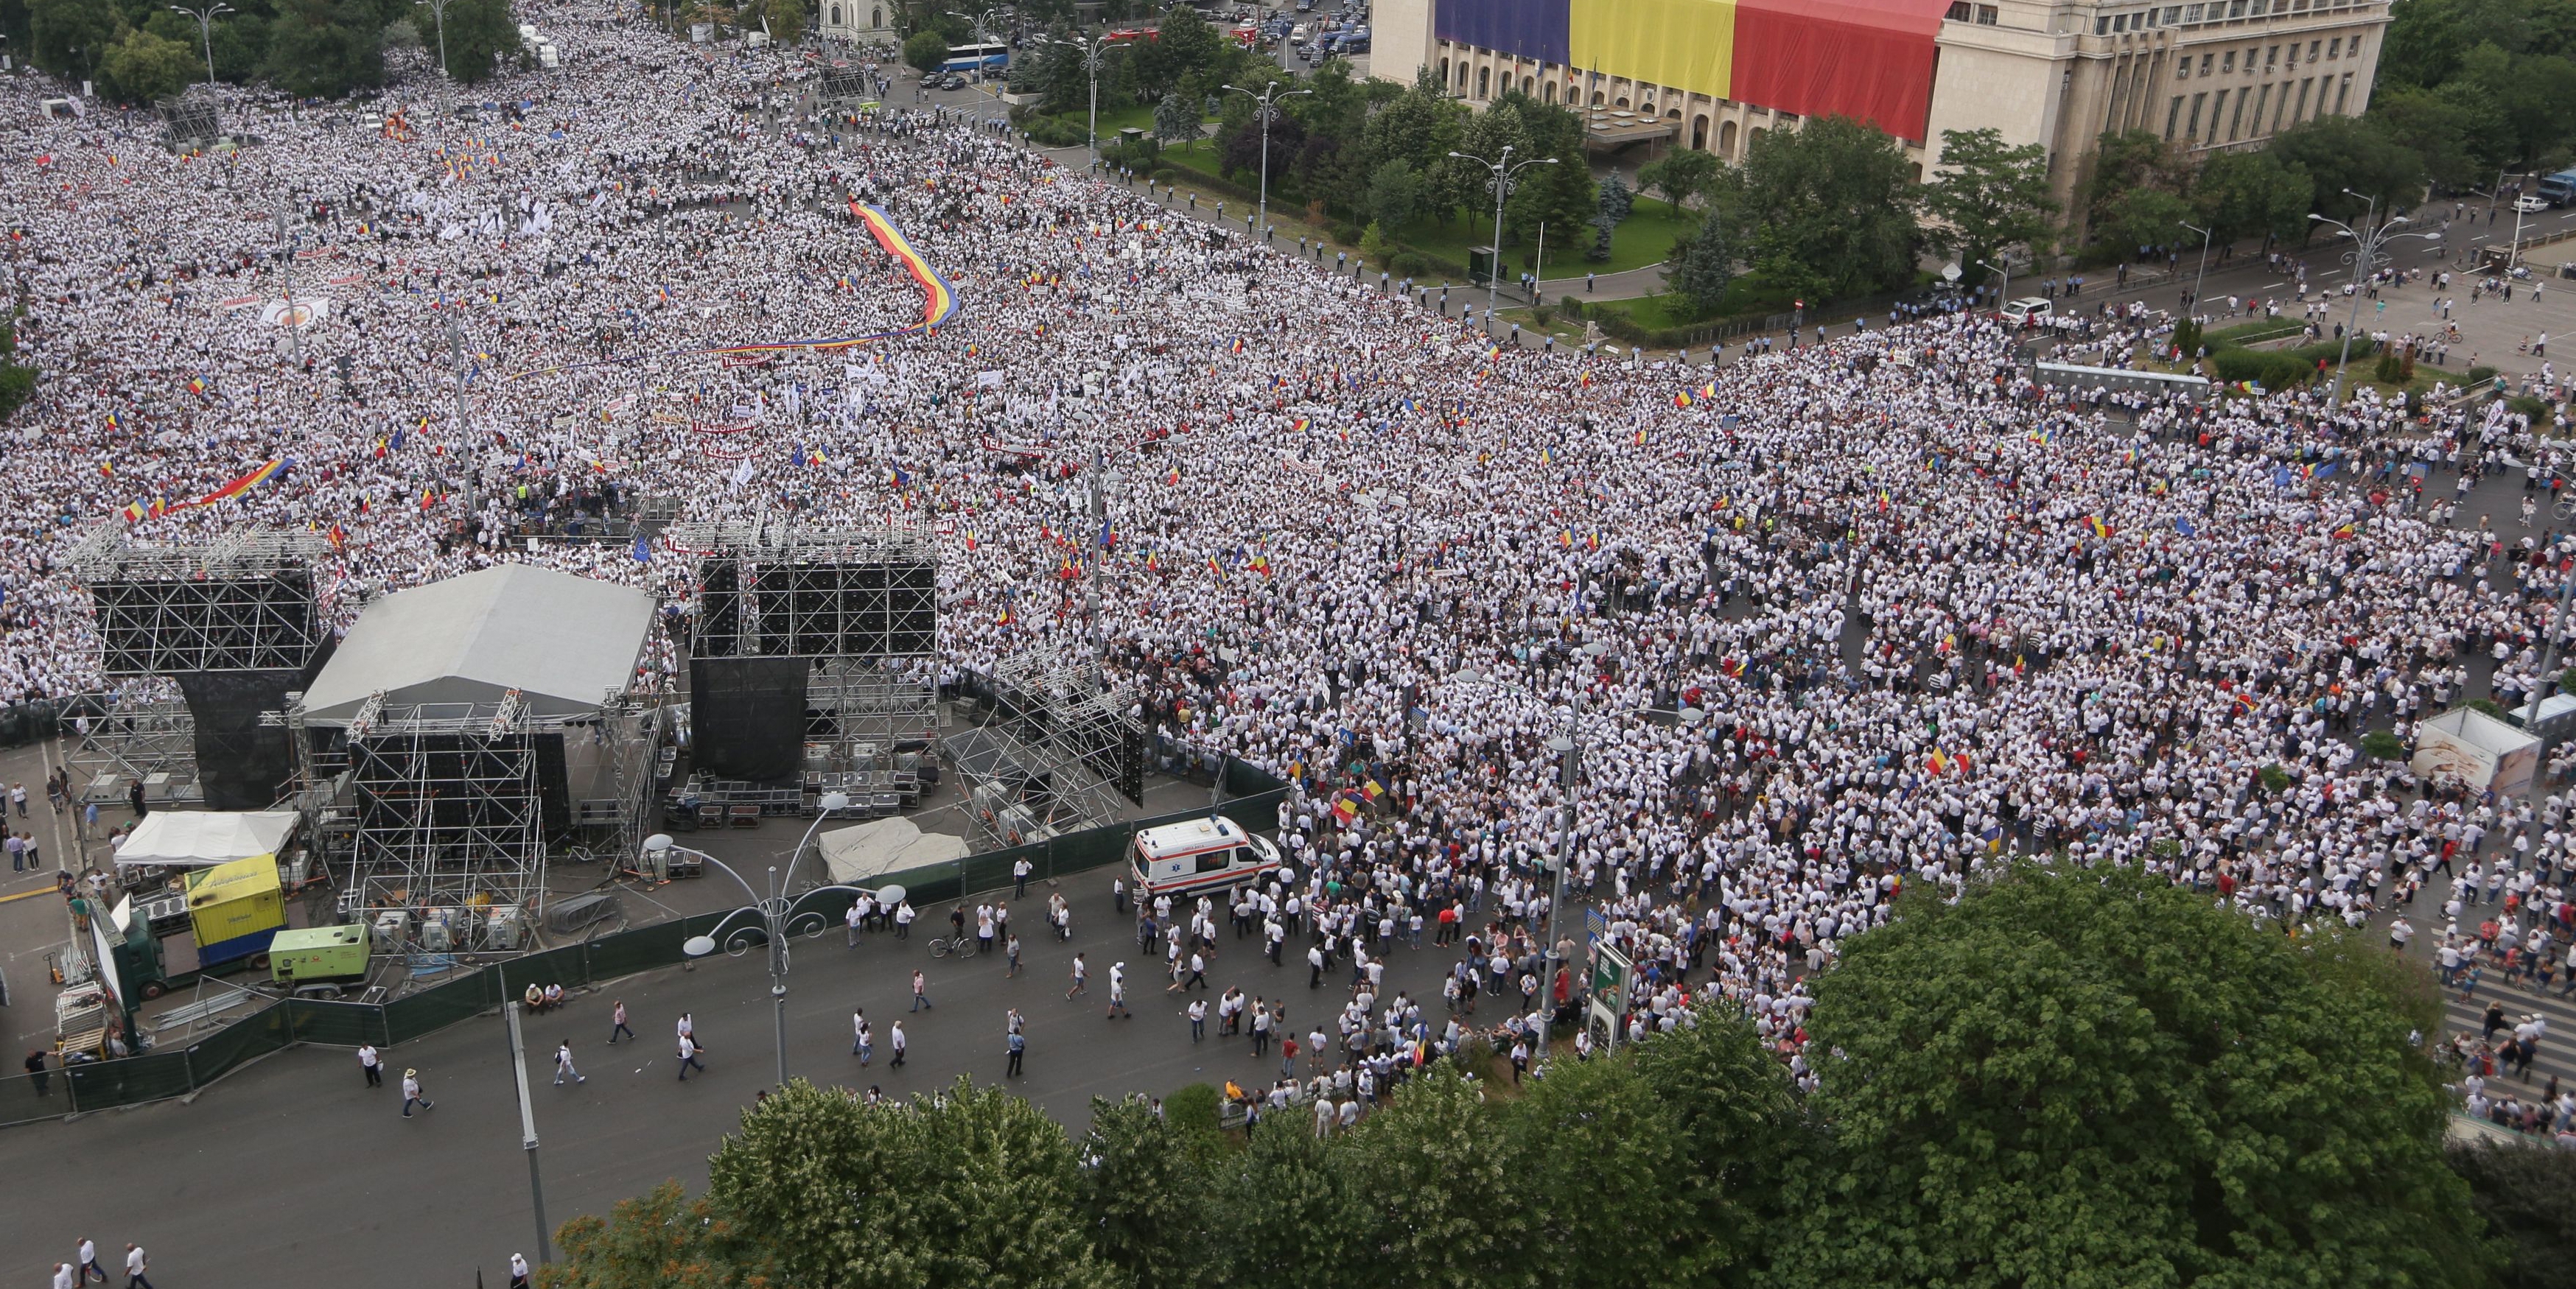 End Of The Psd Rally More Than 100 000 People Listened To The